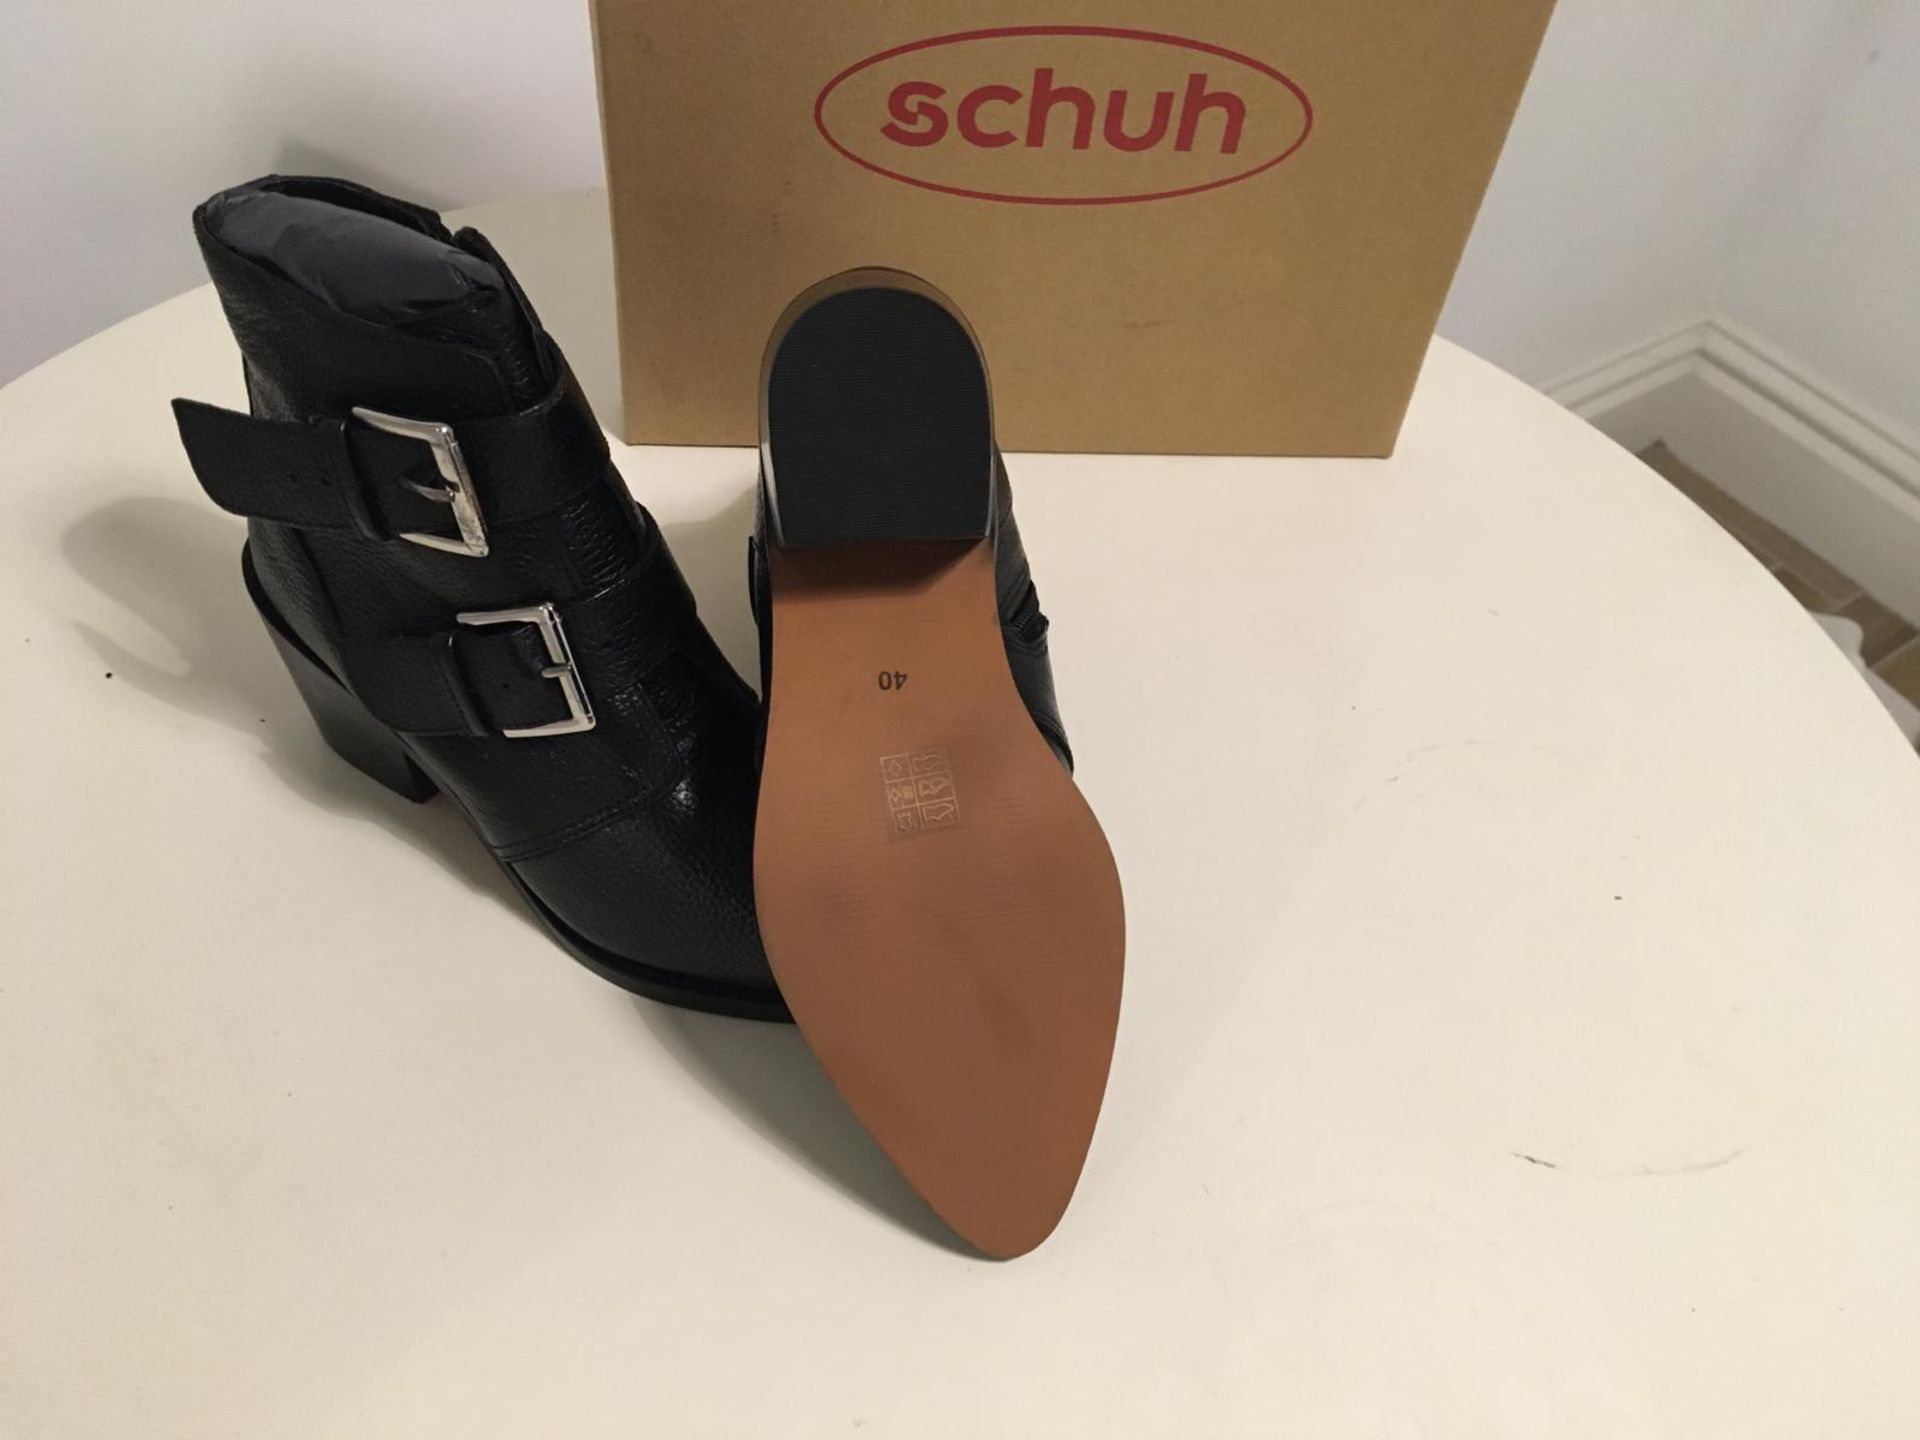 Brand New Schuh Ladies Leather Boots - Cody Model Size EU 37 / UK 4